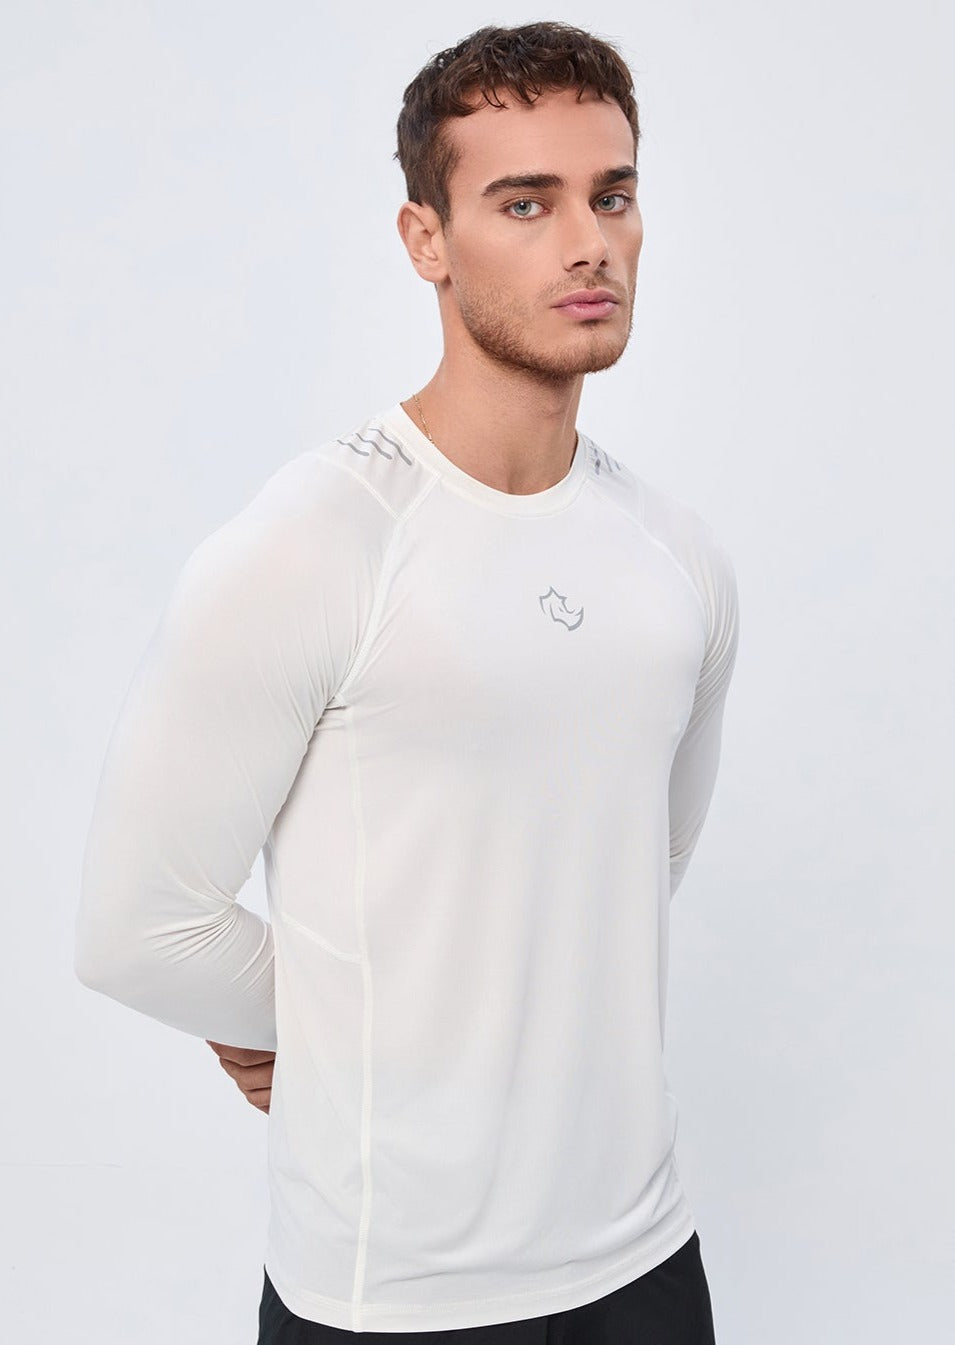 COMPRESSION FIT Long Sleeve CORE LONG SLEEVE - COCONUT WHITE